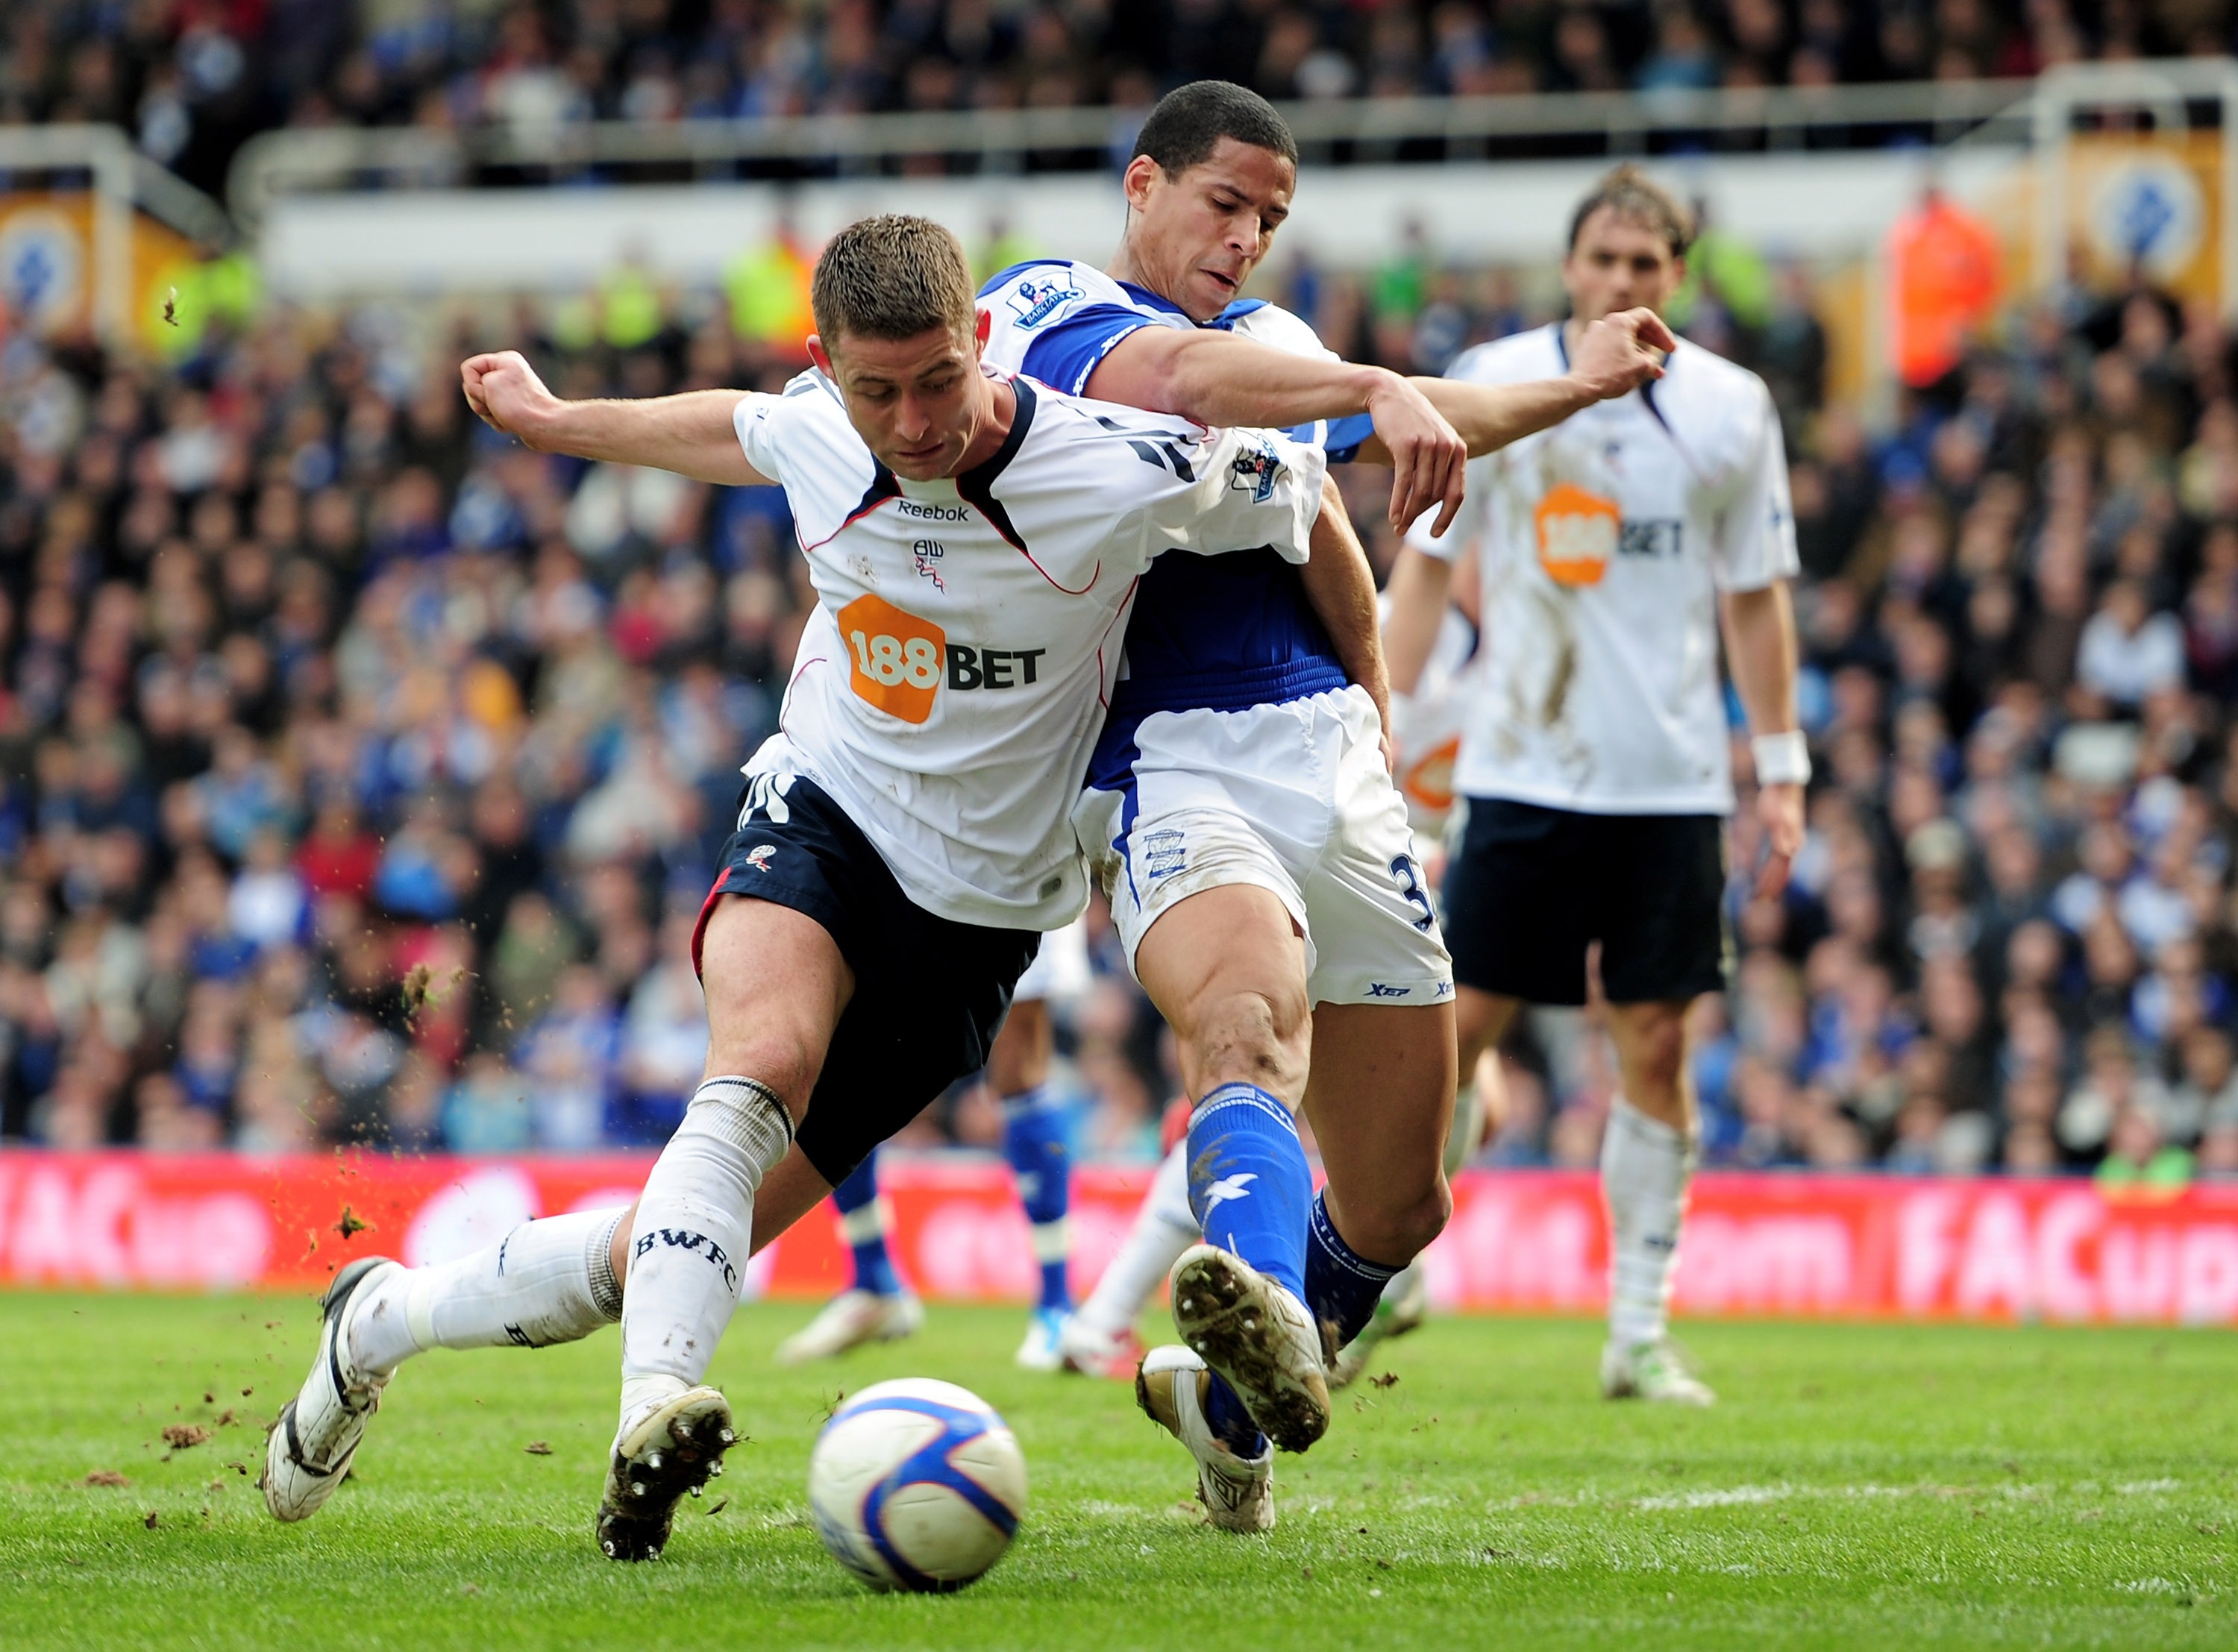 BIRMINGHAM, ENGLAND - MARCH 12:  Gary Cahill of Bolton Wanderers holds off a challenge from Curtis Davies of Birmingham City during the FA Cup sponsored by E.On Sixth Round match between Birmingham City and Bolton Wanderers at St Andrews on March 12, 2011